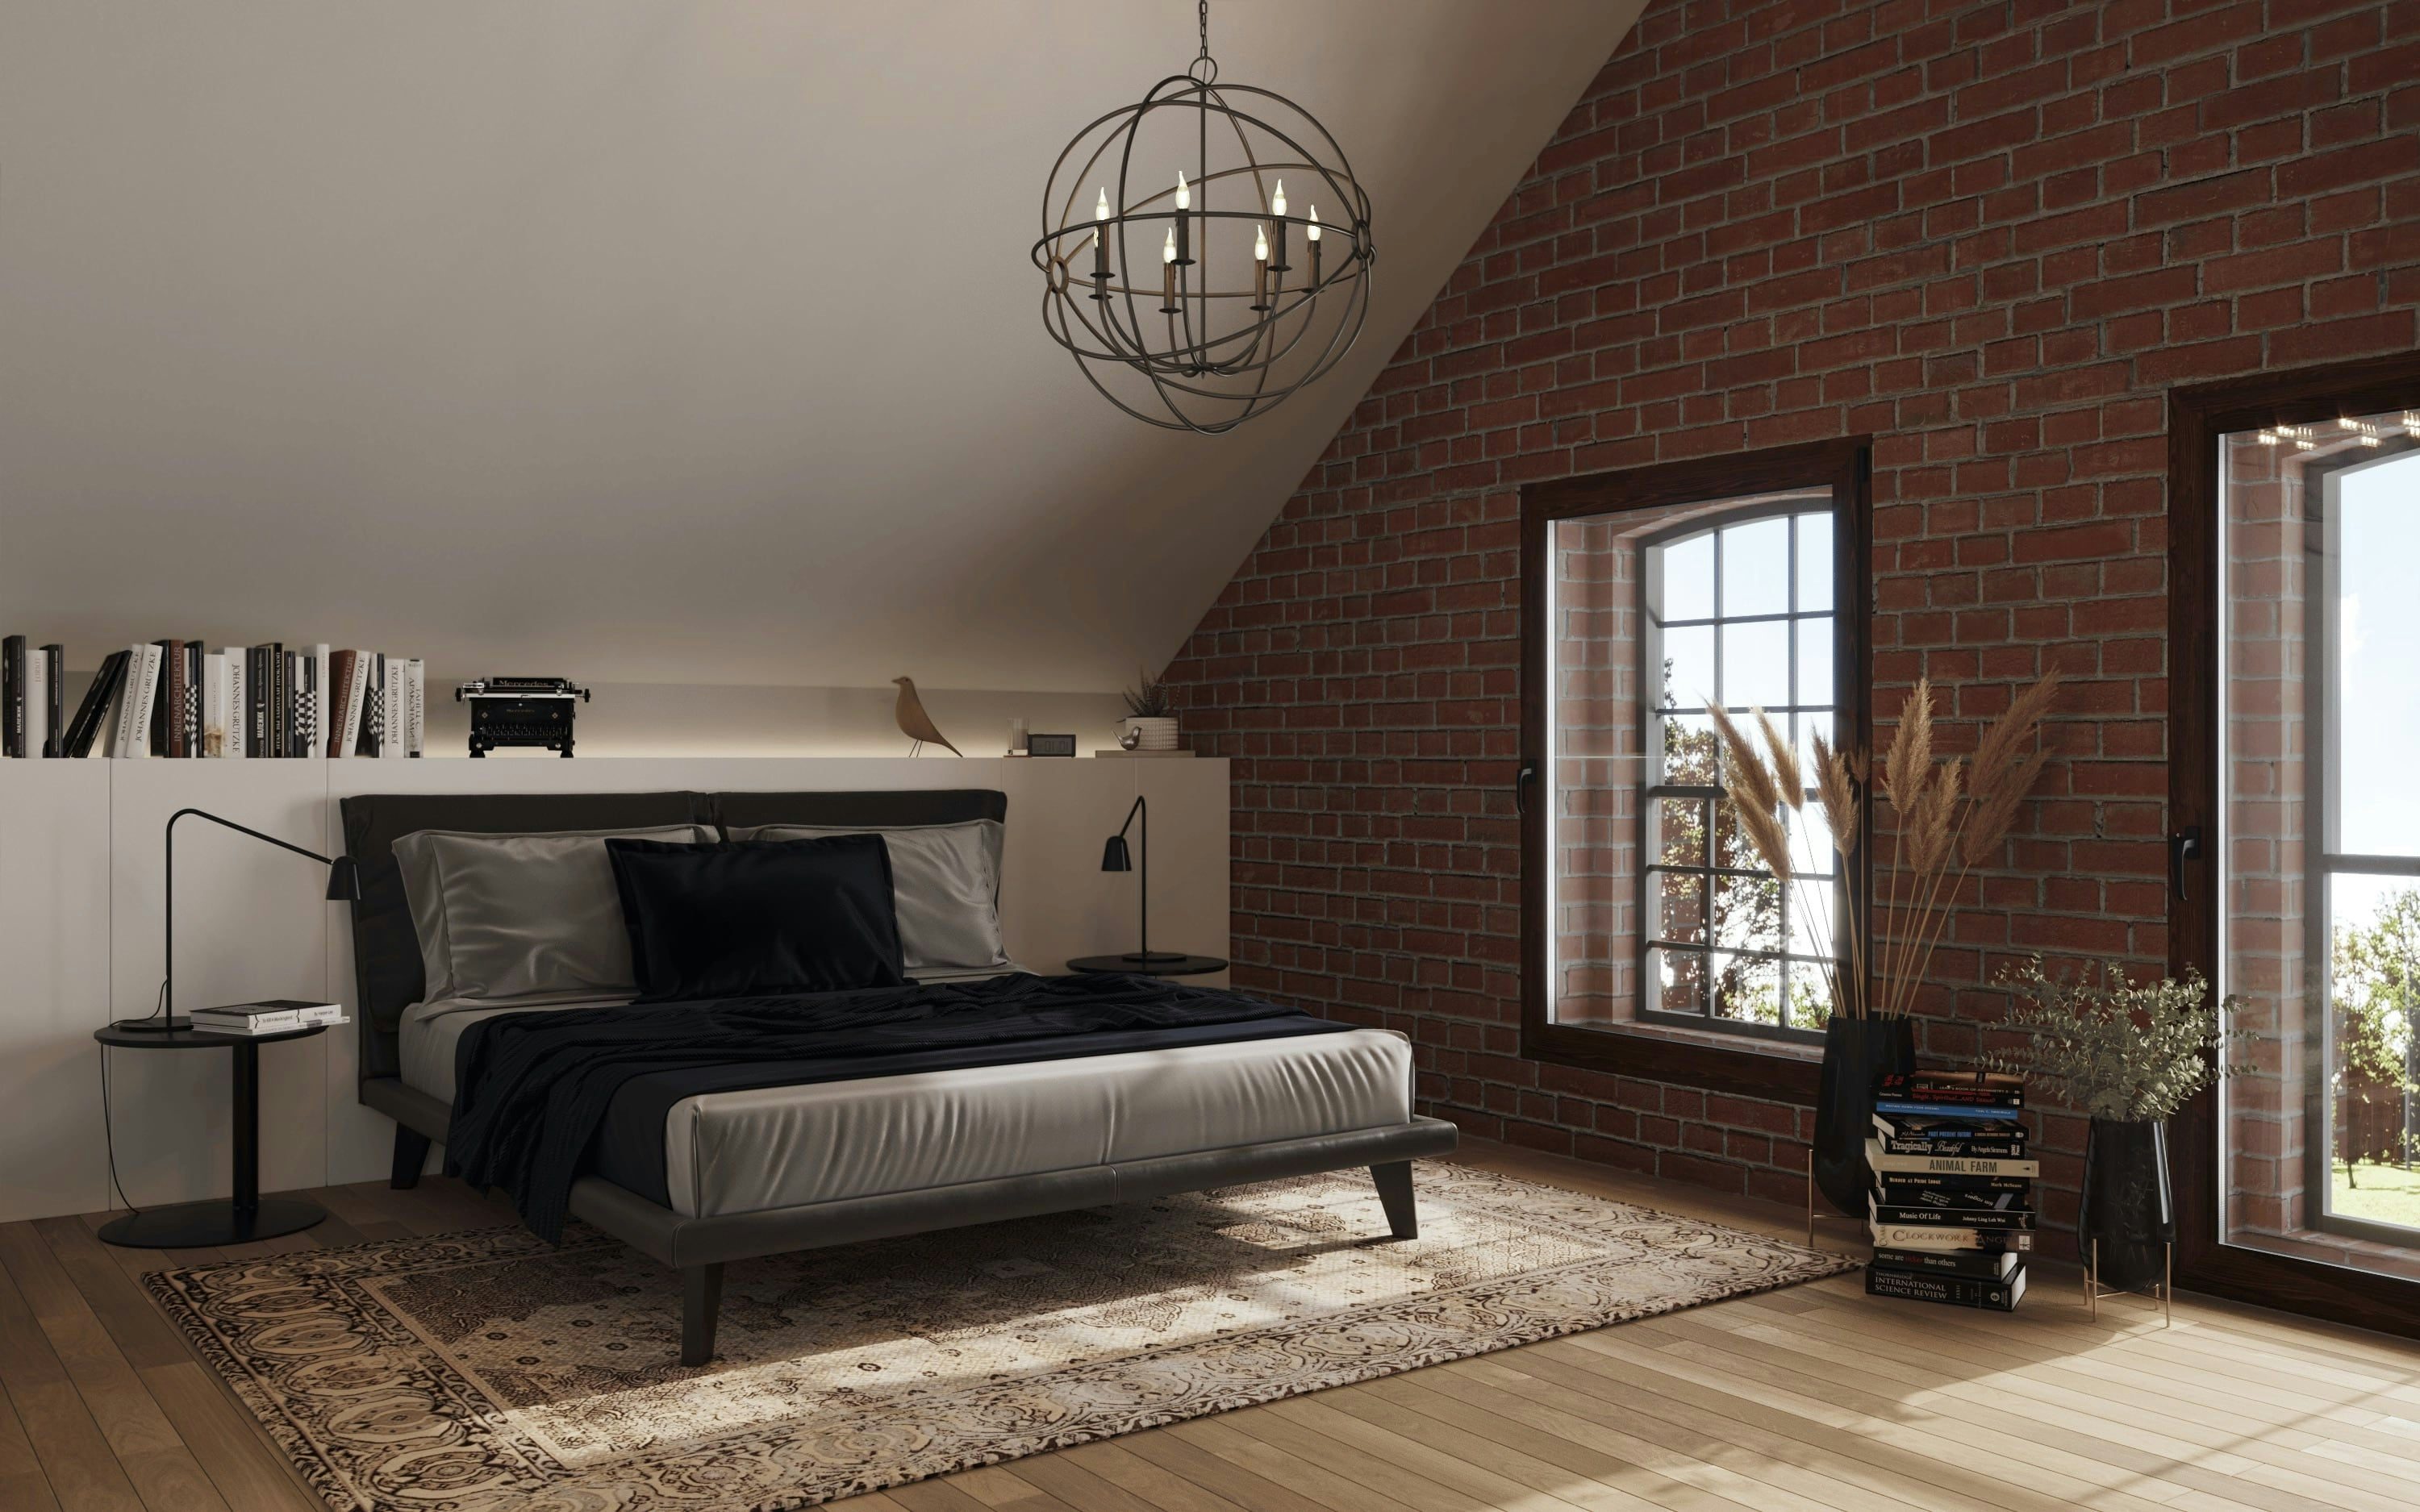 3D Interior Visualization of master berdor in renovated historical property in loft style, Germany